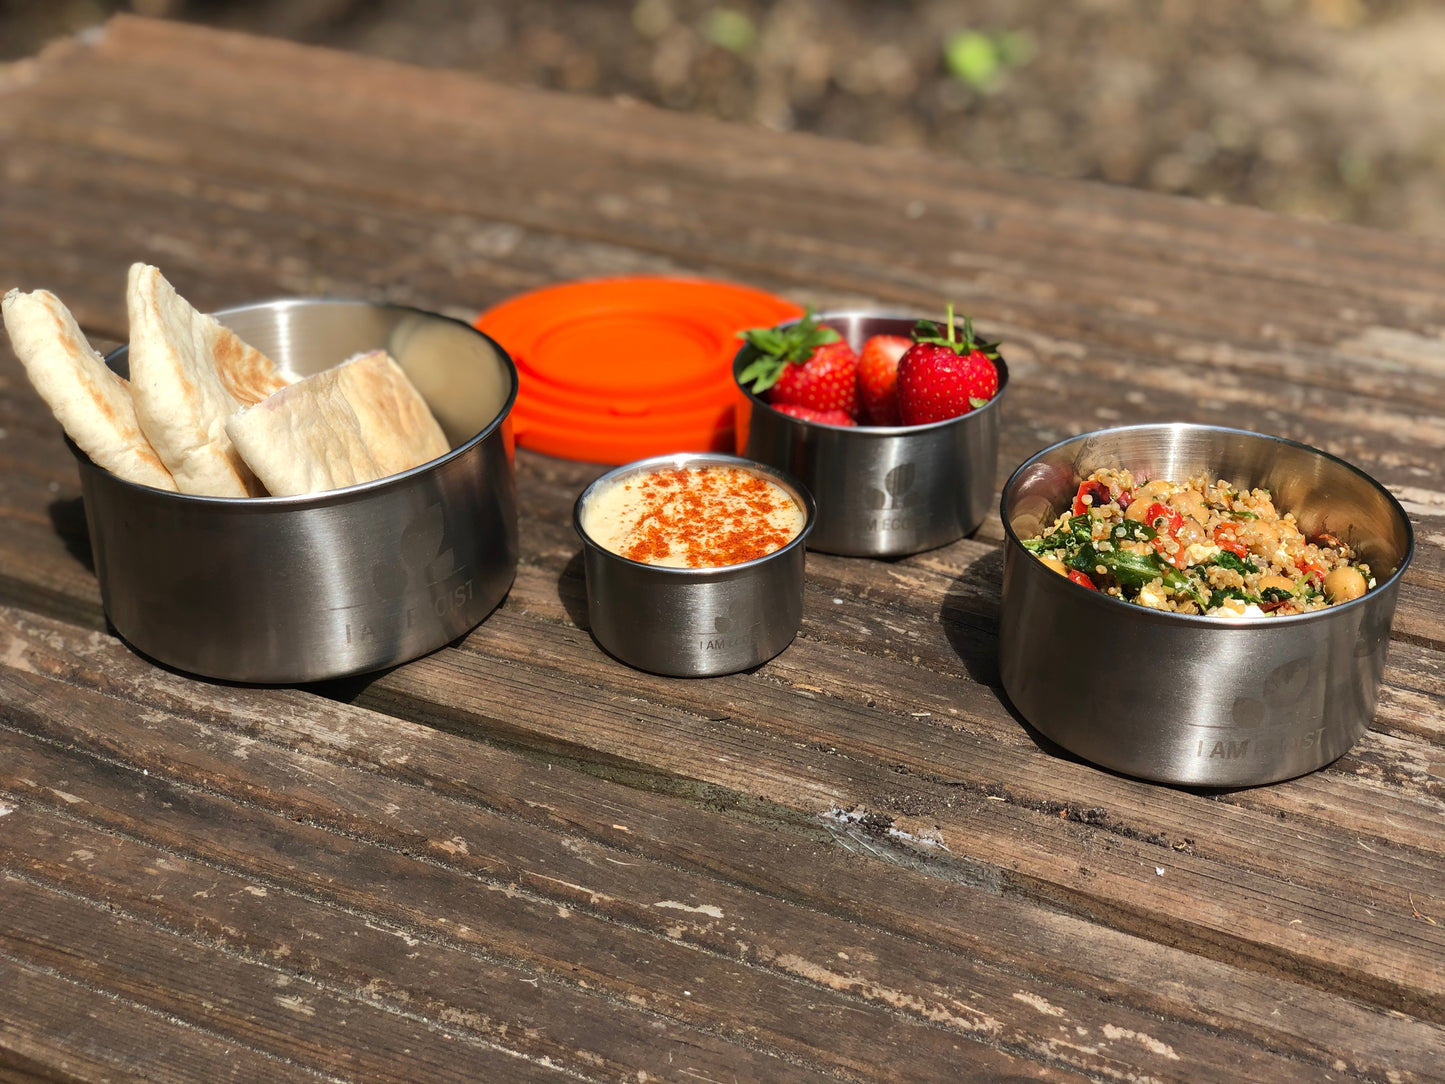 Set of 4 Stainless Steel & Silicone Leakproof Containers